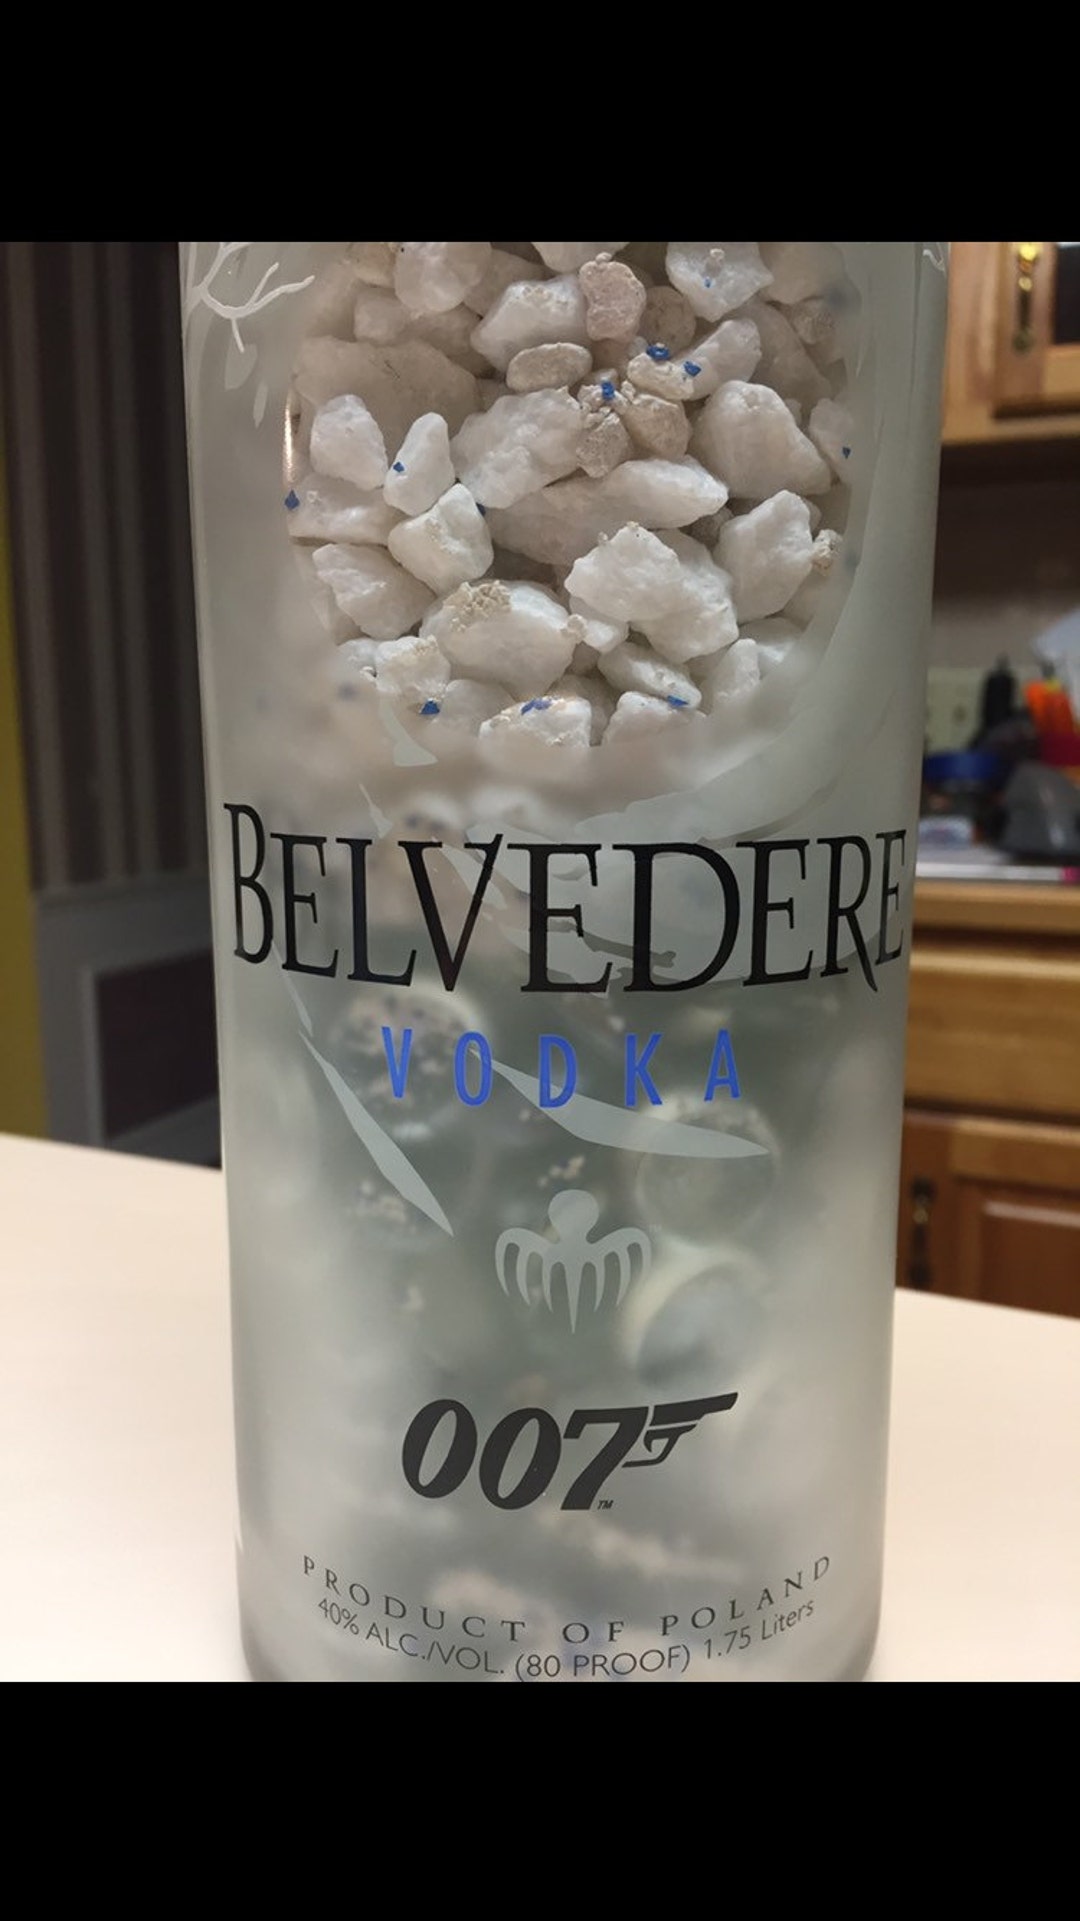 Where to buy Belvedere 007 James Bond Limited Edition Vodka